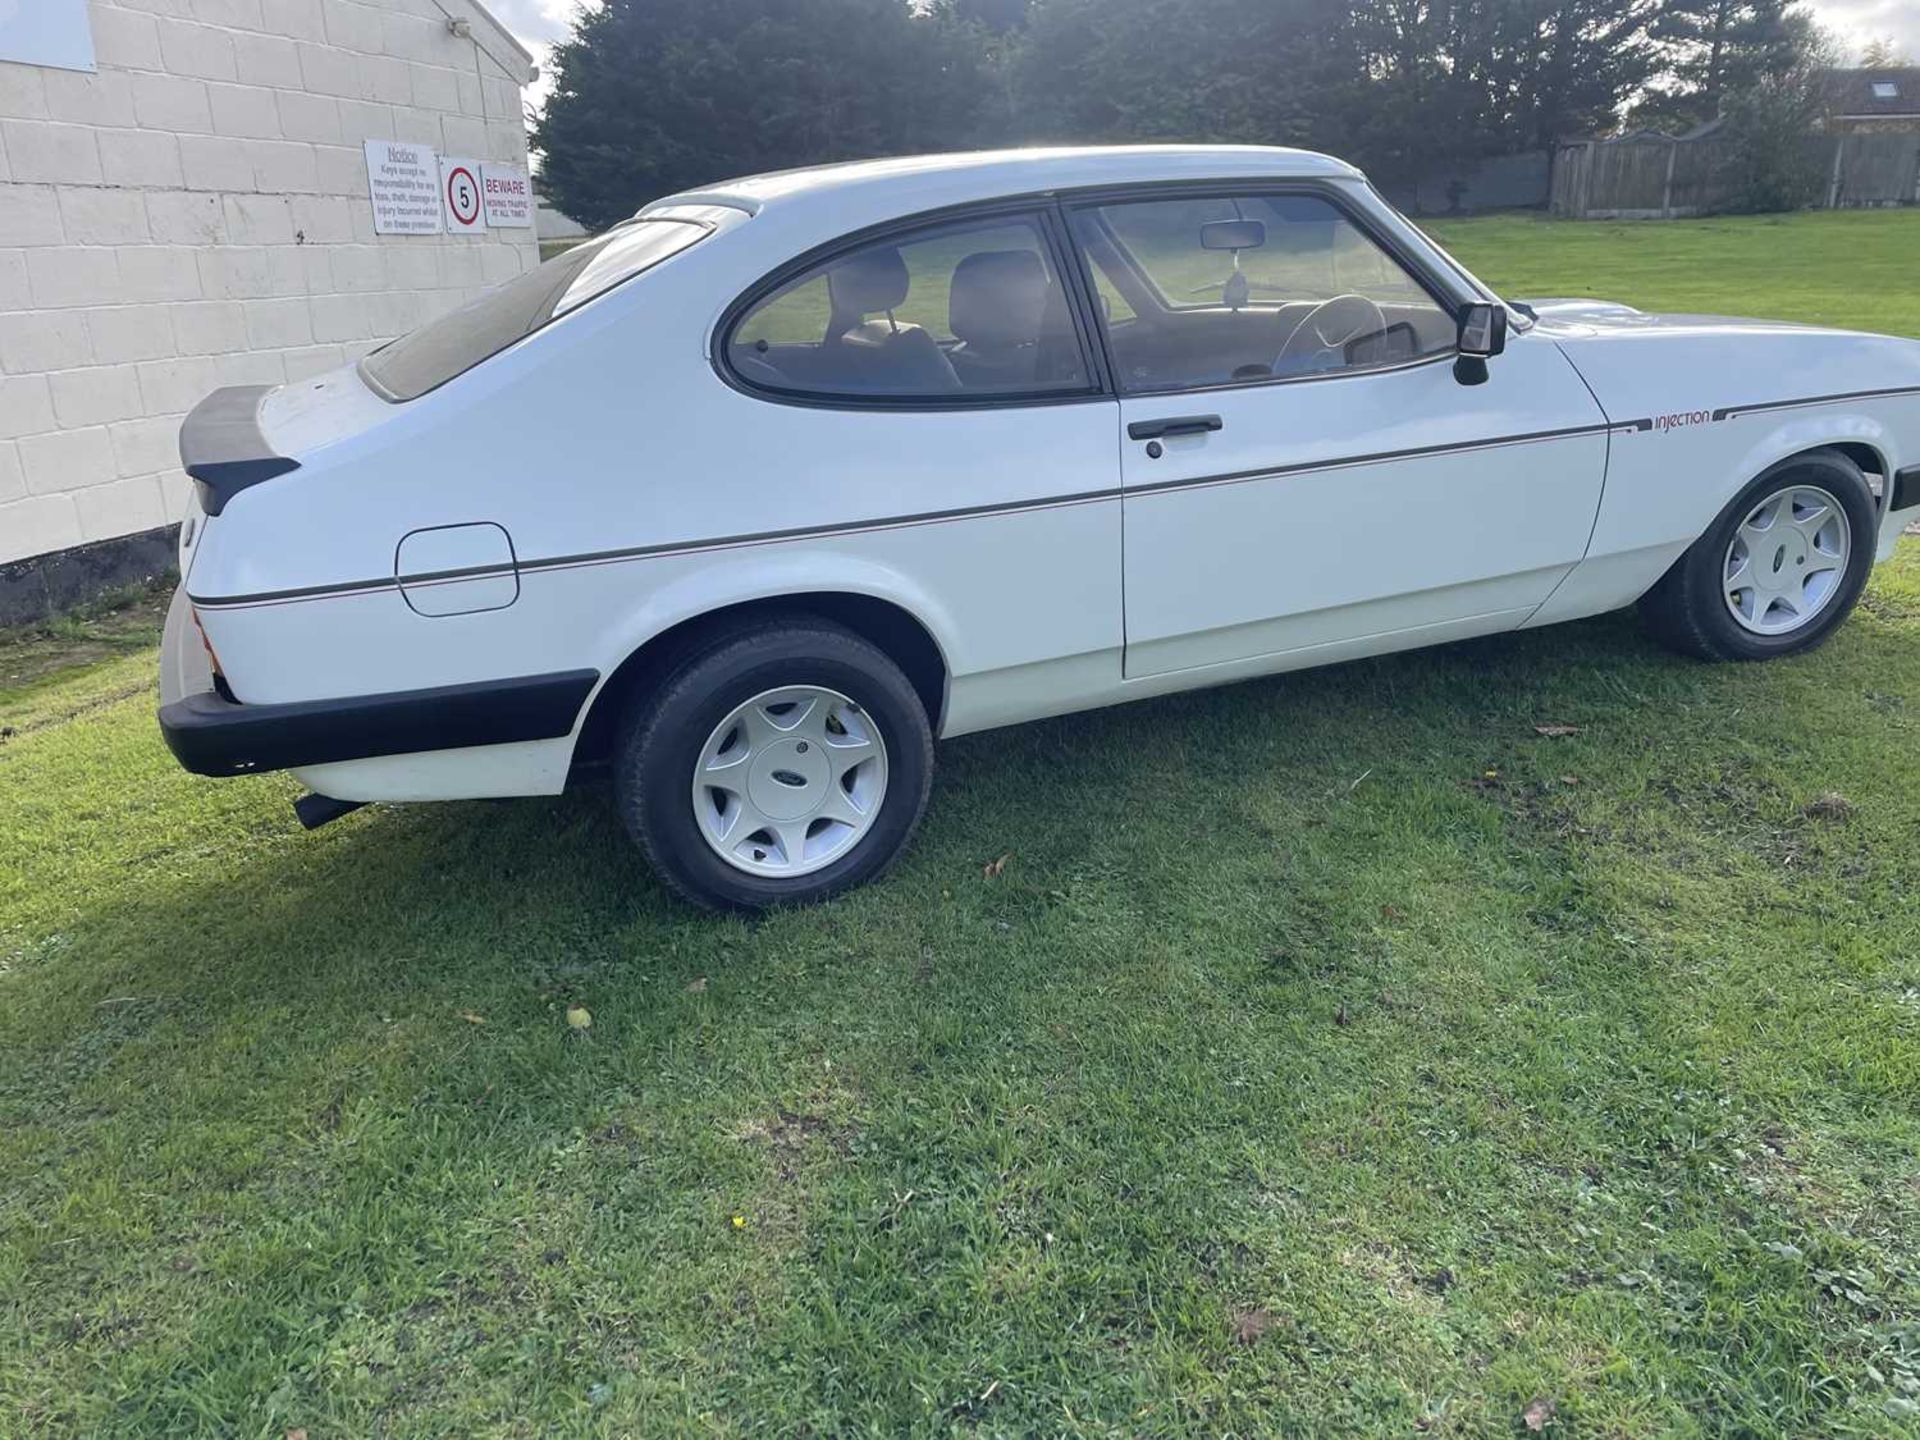 1984 Ford Capri 2.8 Injection - Image 2 of 6